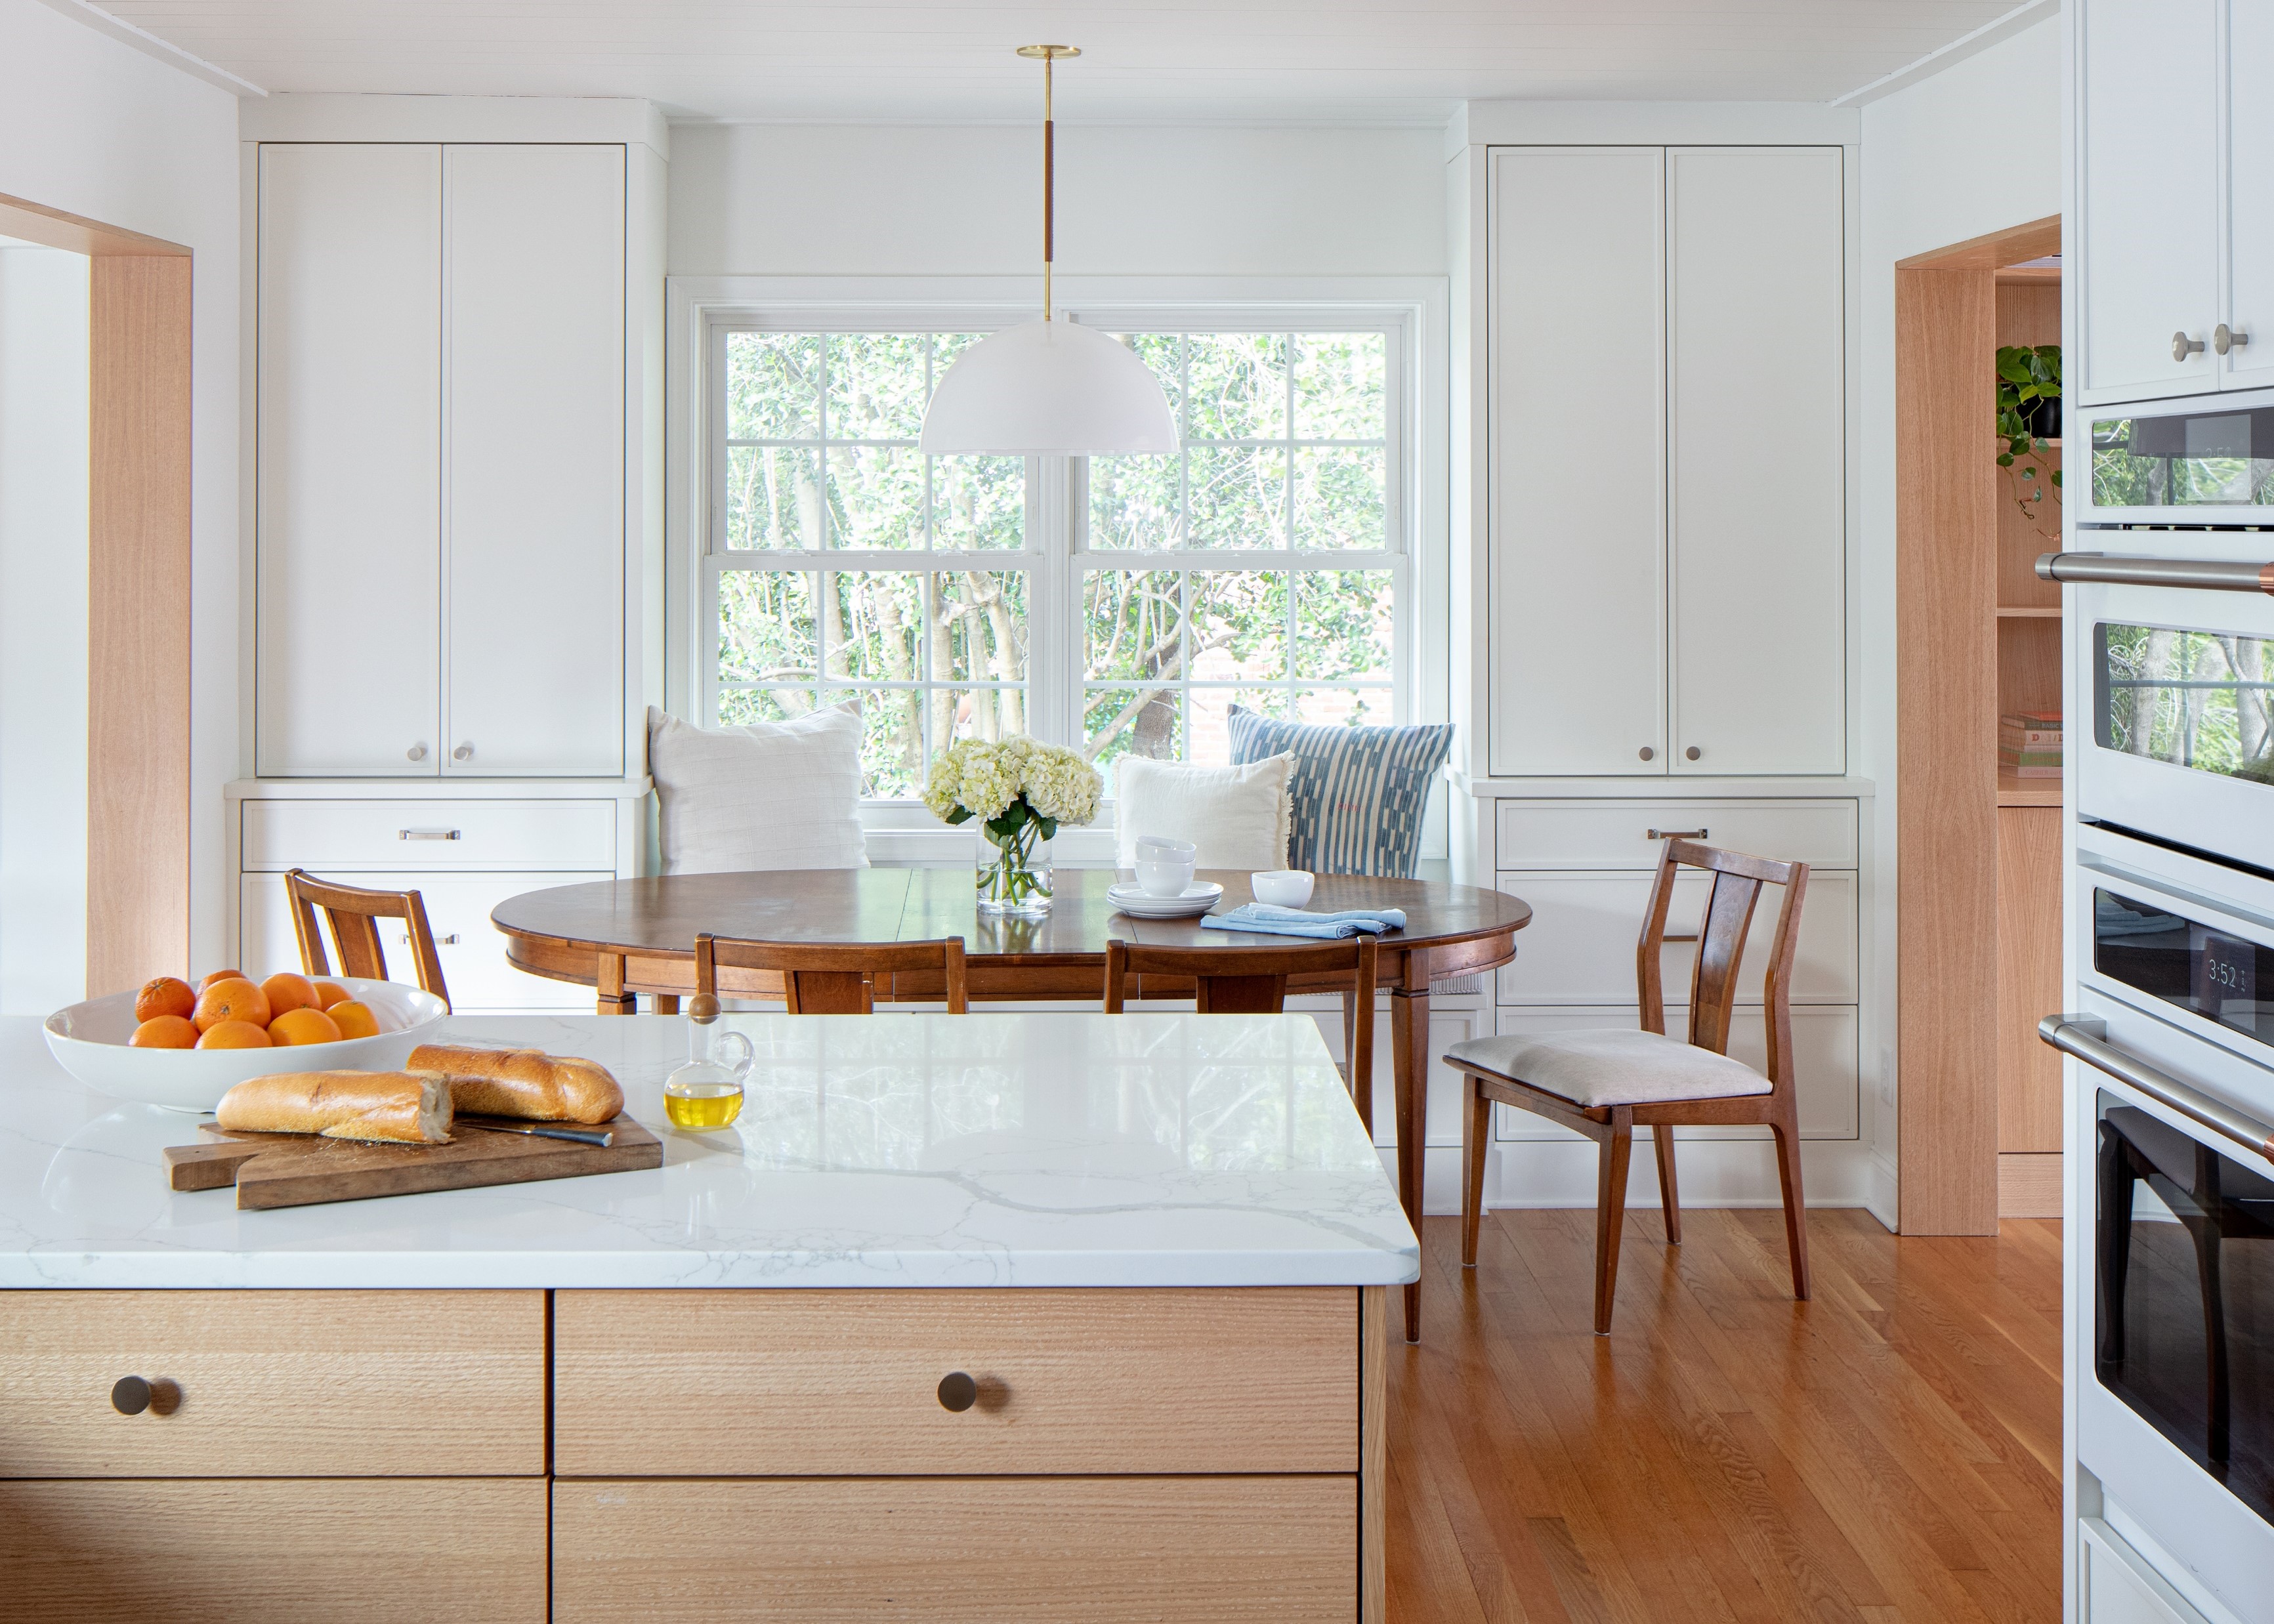 Eat-In Kitchen with Built-In Casework